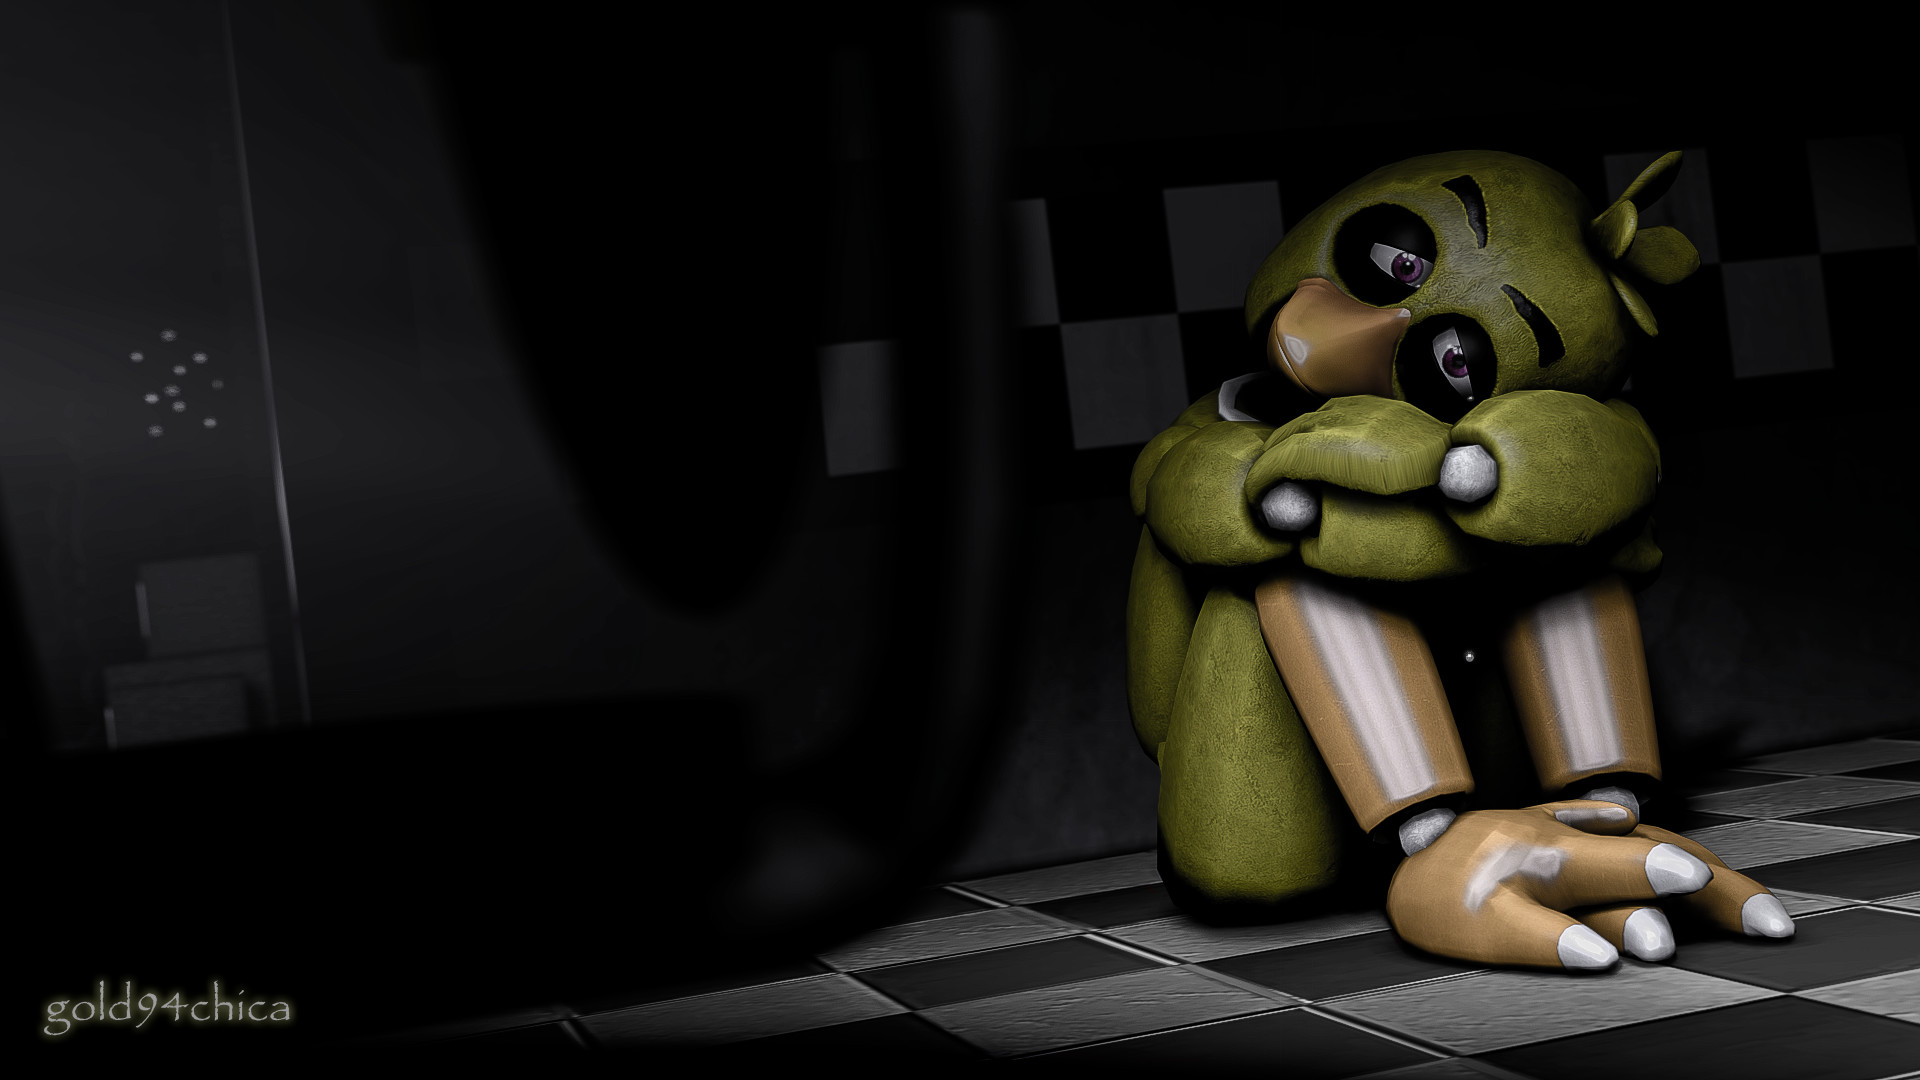 1920x1080 0 FnafJumpscare GIFS by crueldude100 on DeviantA Fnaf Wallpaper Chica, HDQ  Cover Fnaf Wallpapers for Free, Imag